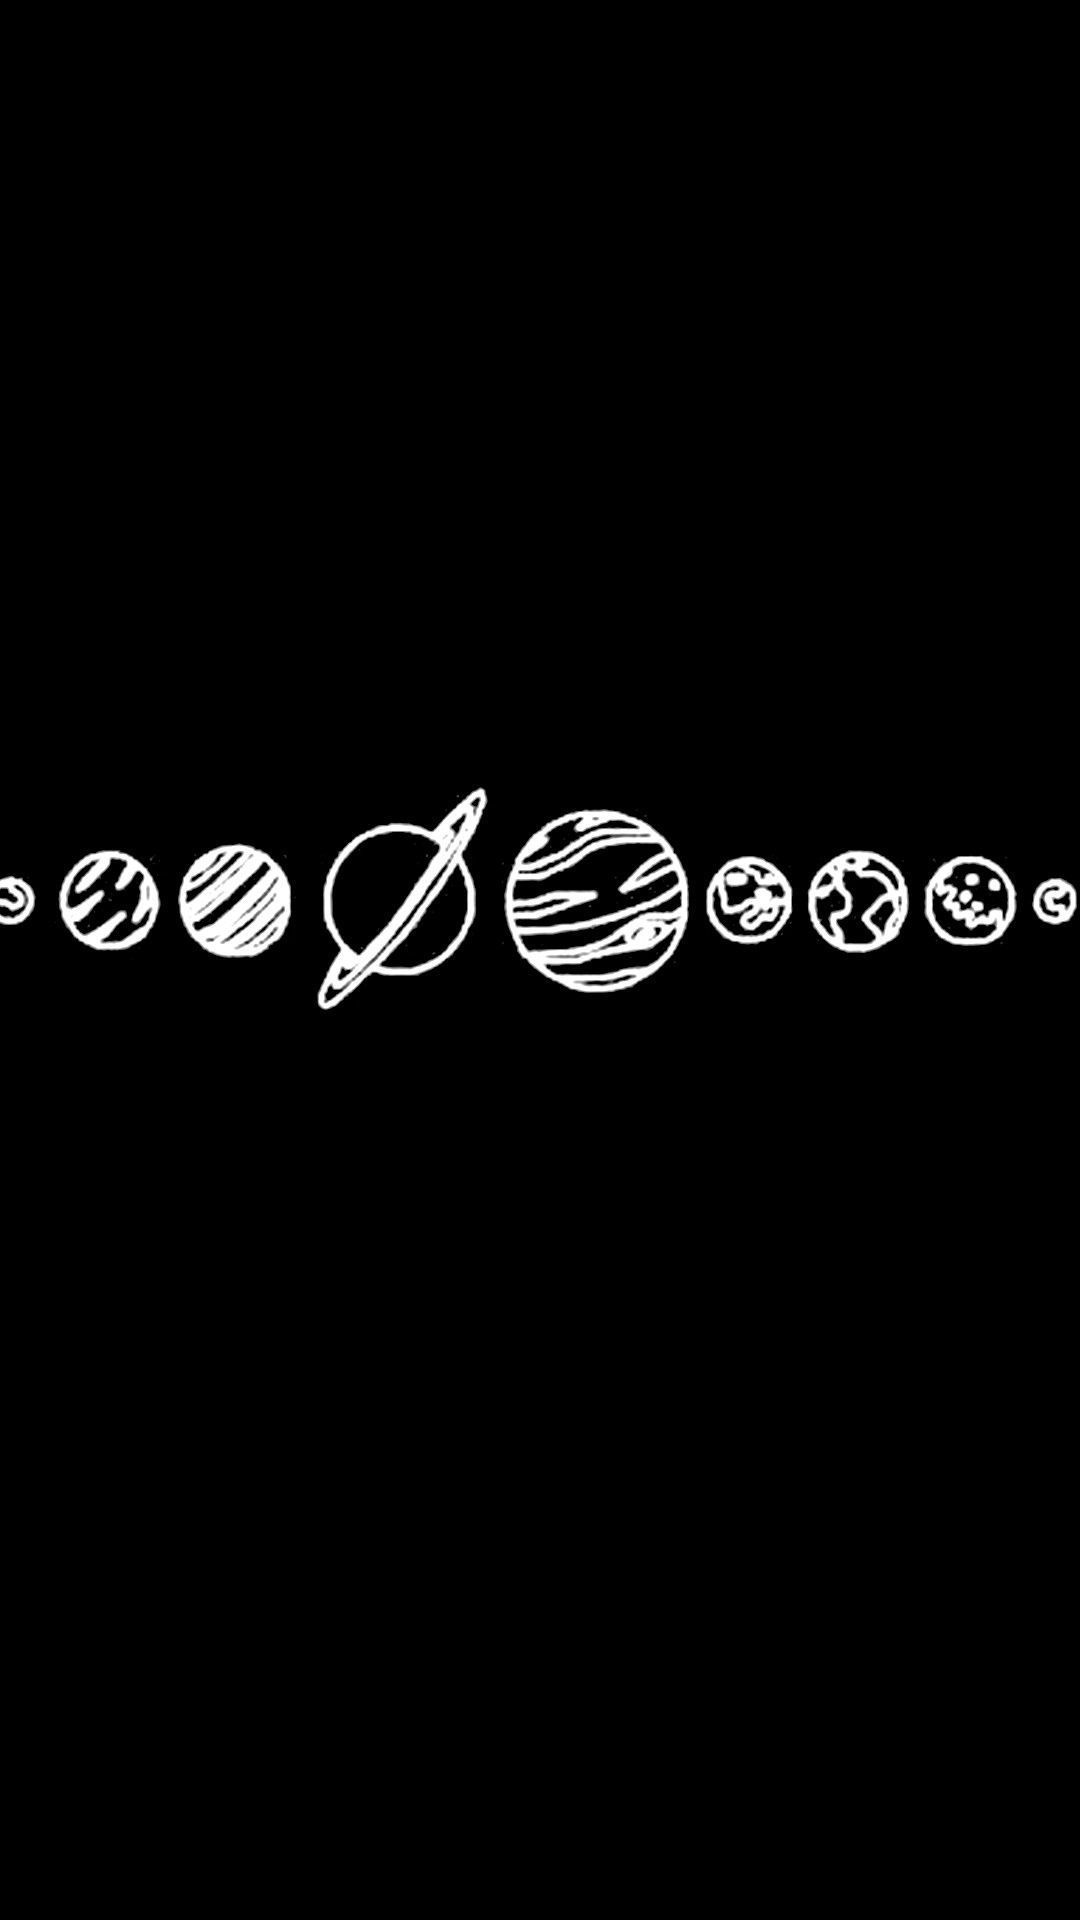 The solar system in black and white - Black, couple